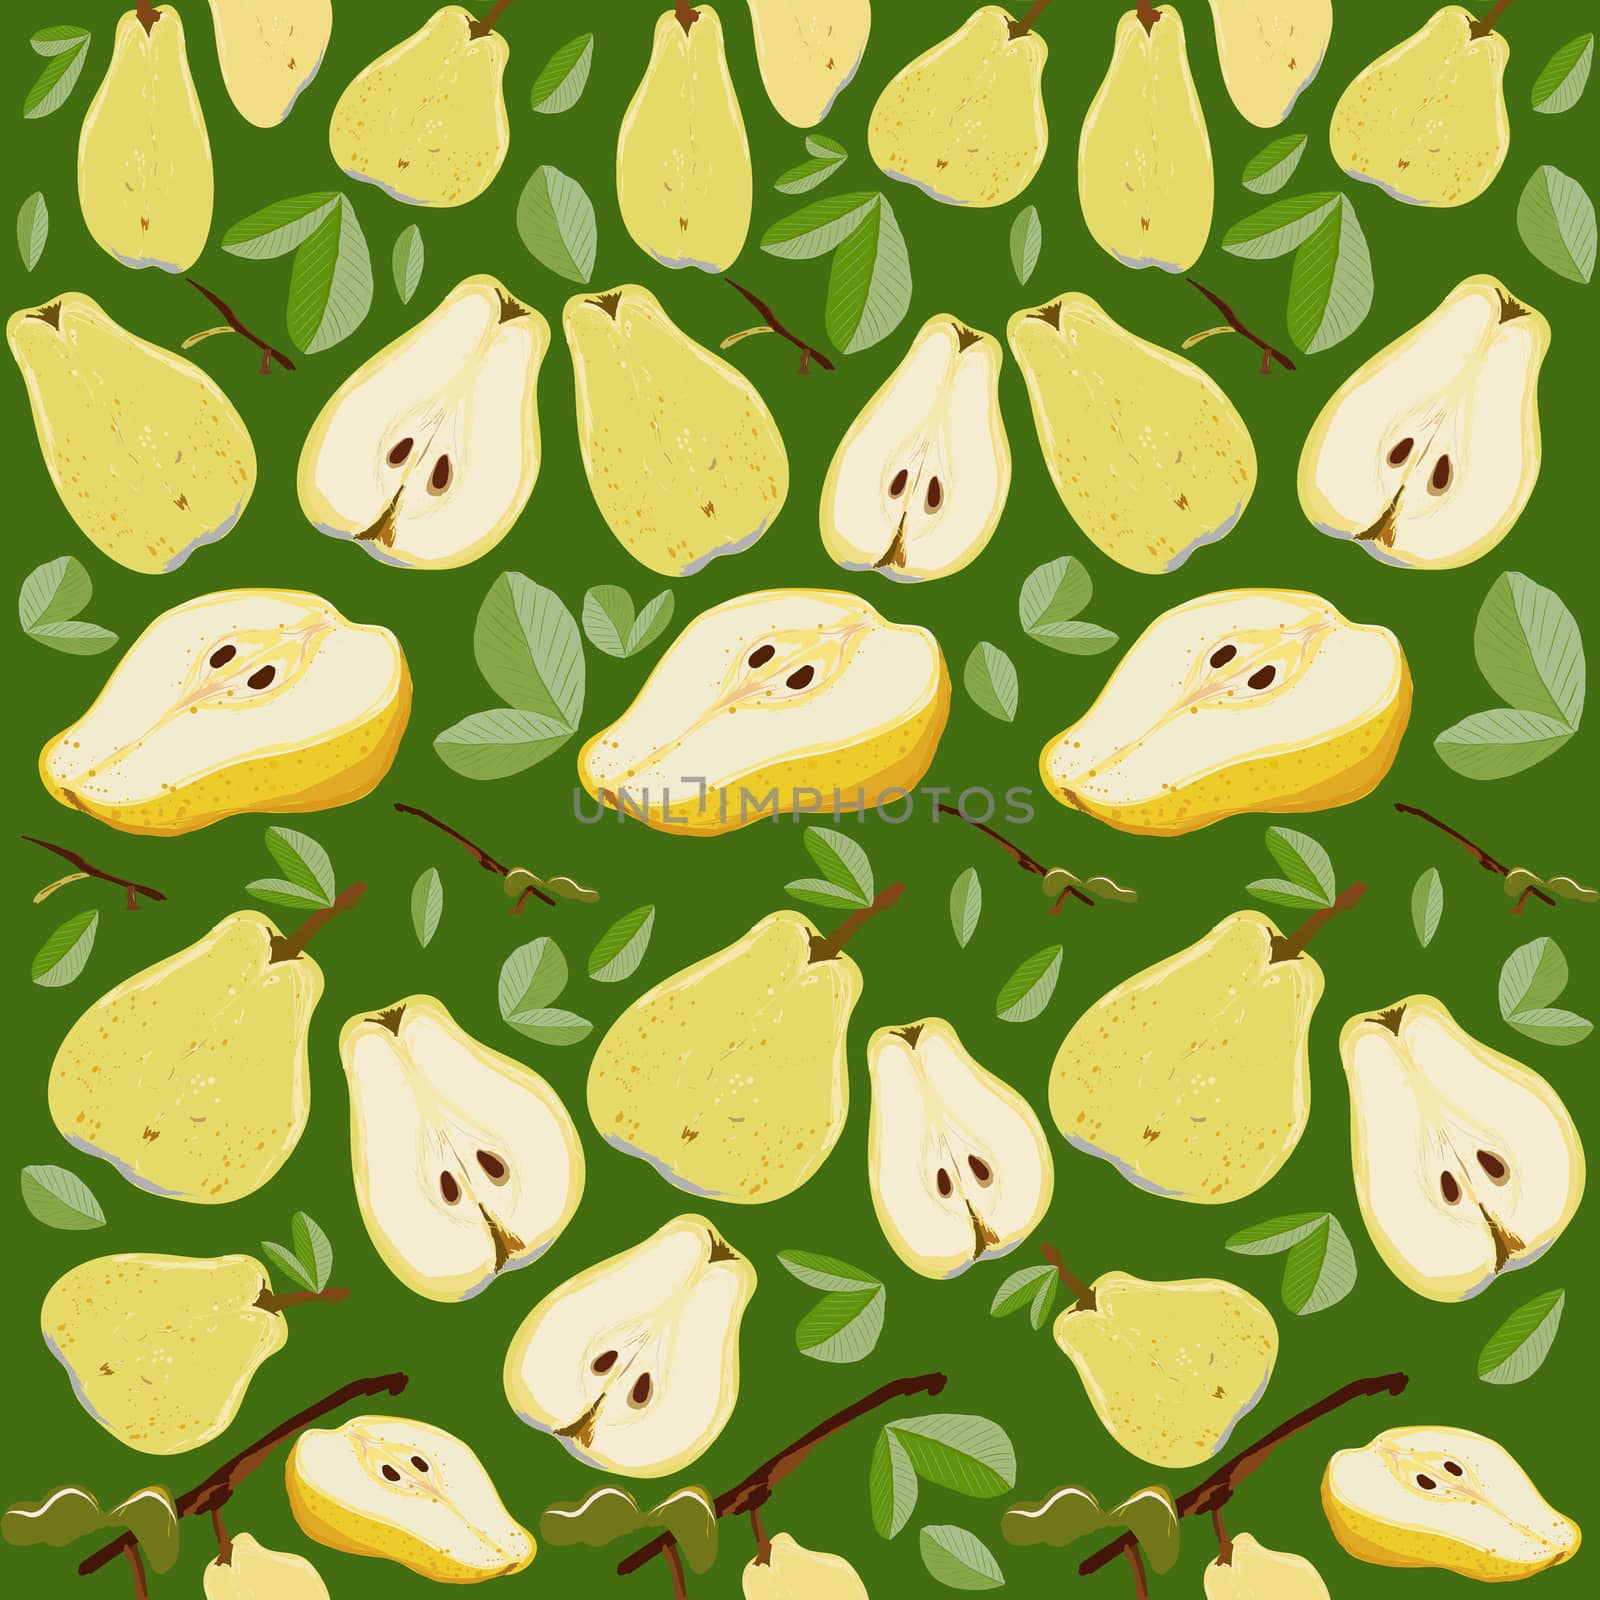 Yellow and orange juicy sliced pears with leaves seamless pattern on a green background. by Nata_Prando